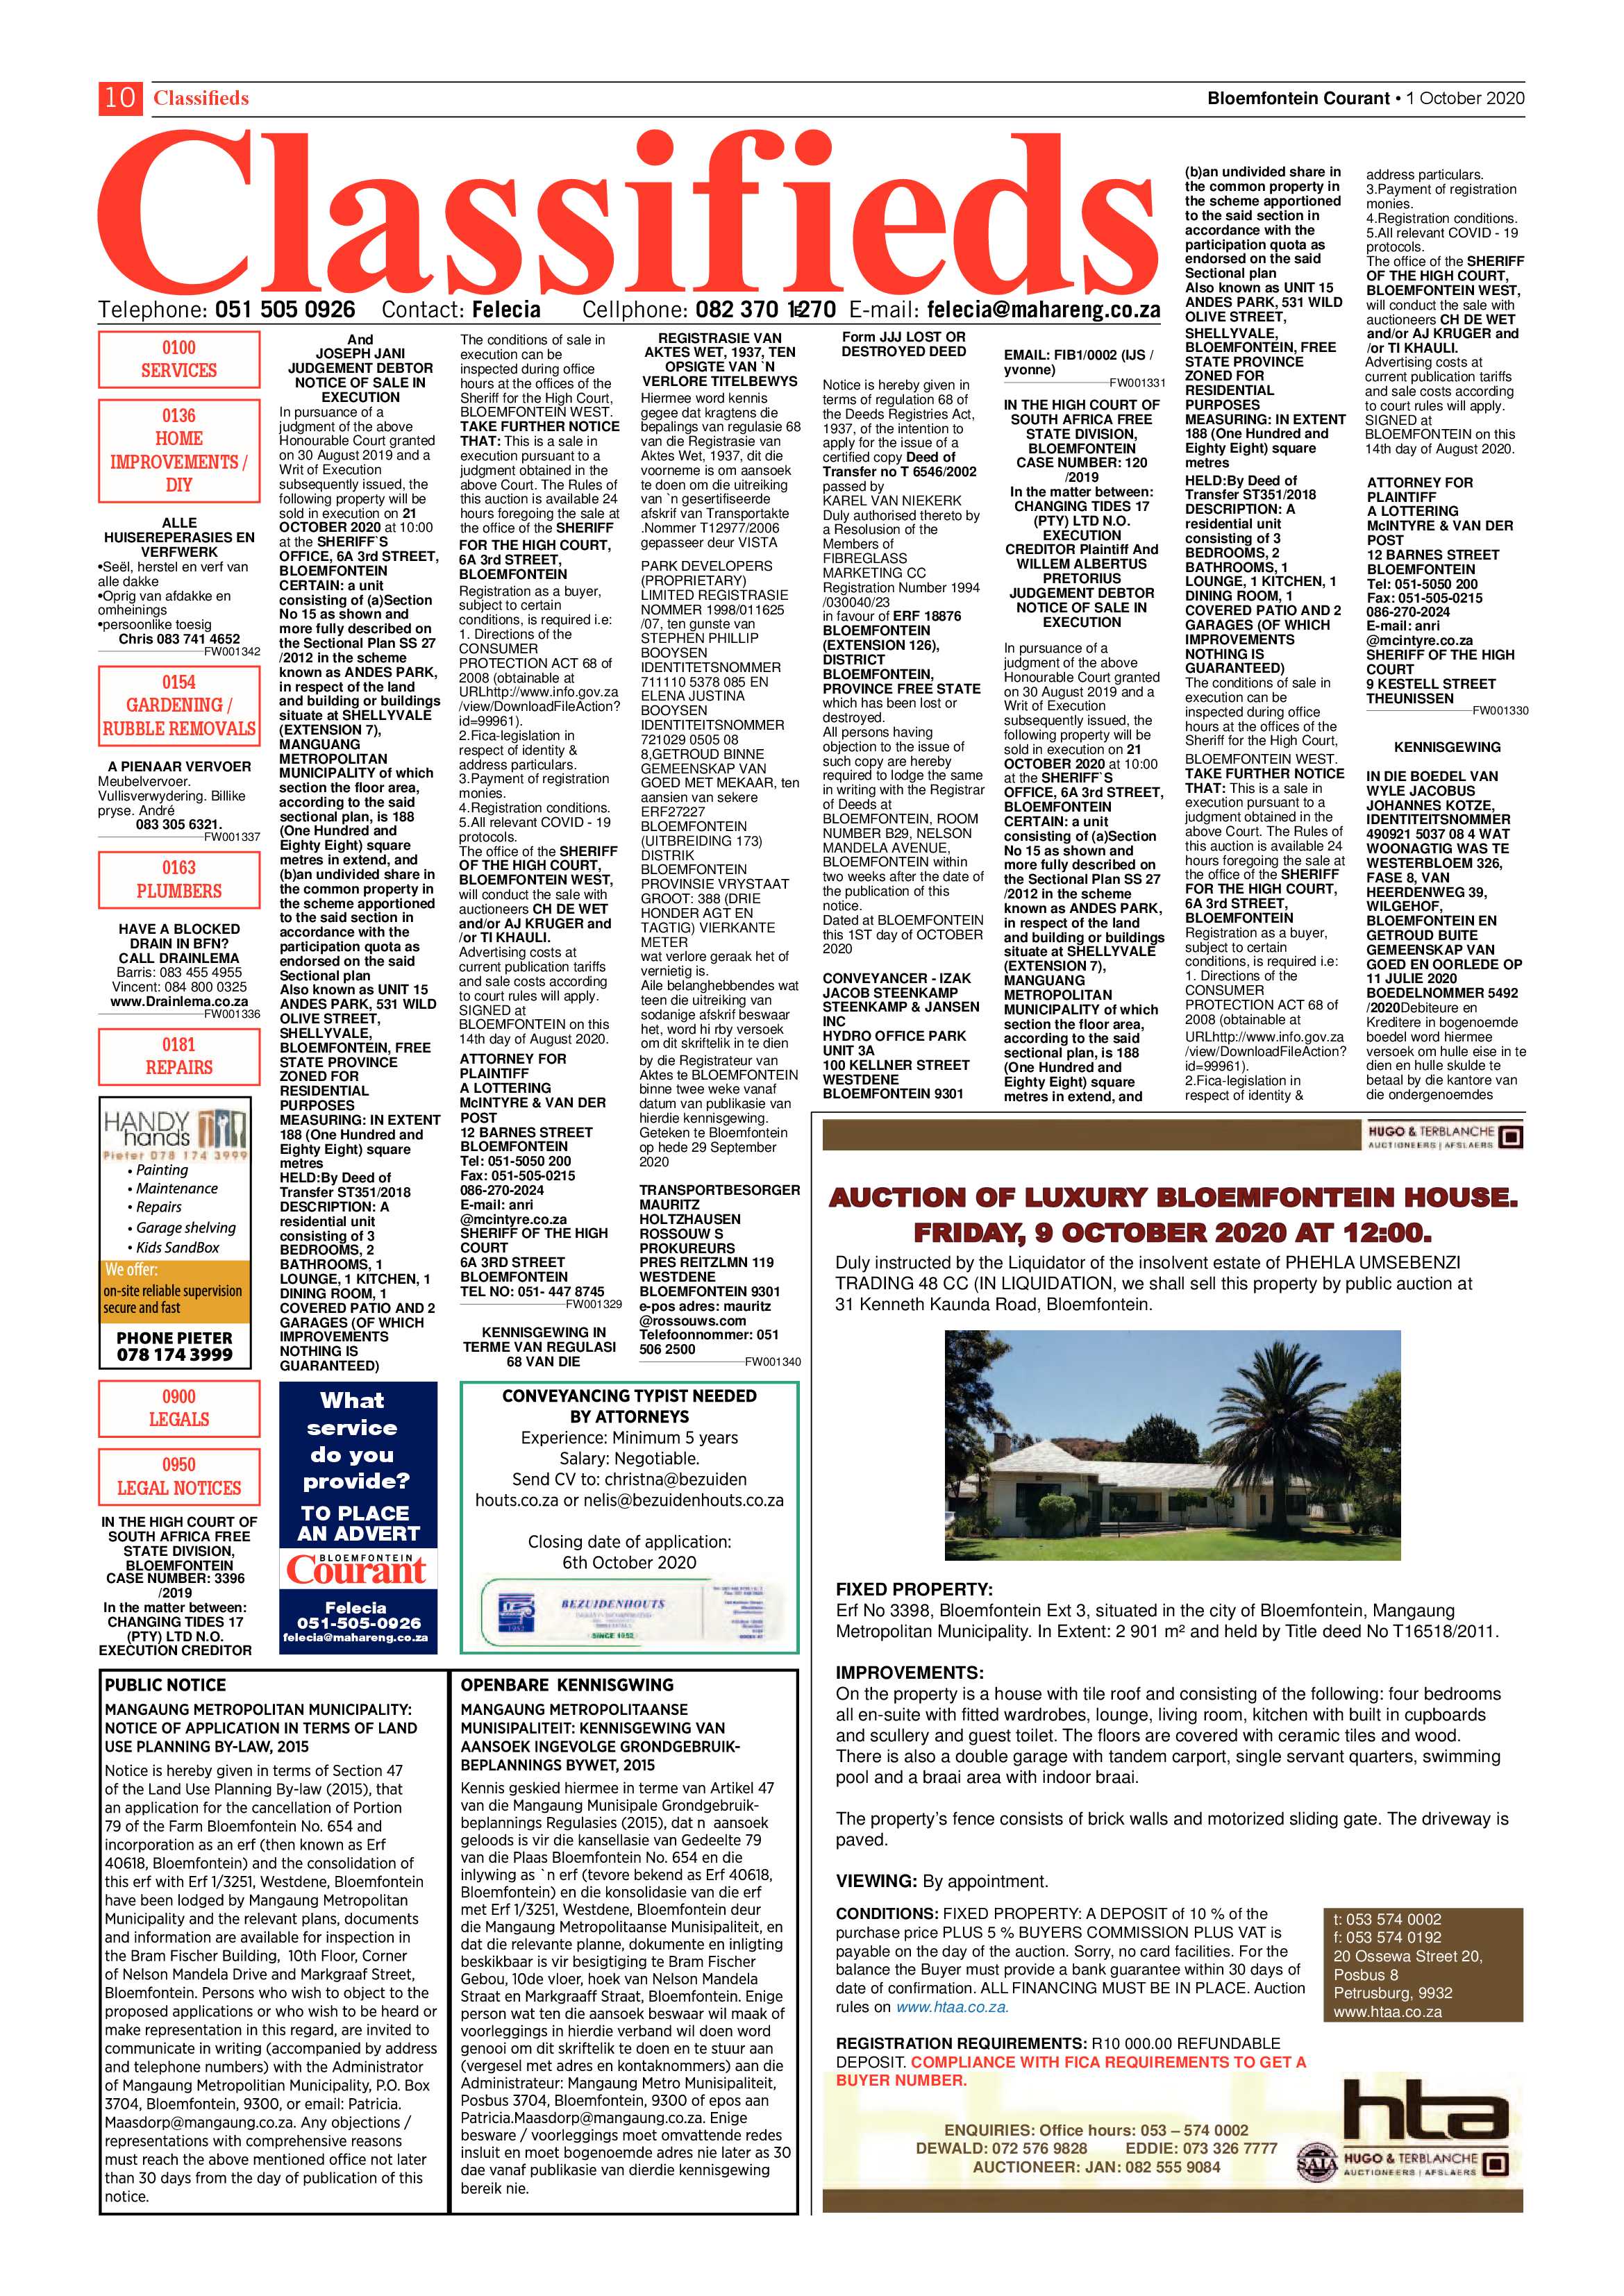 courant-1-october-2020-epapers-page-10